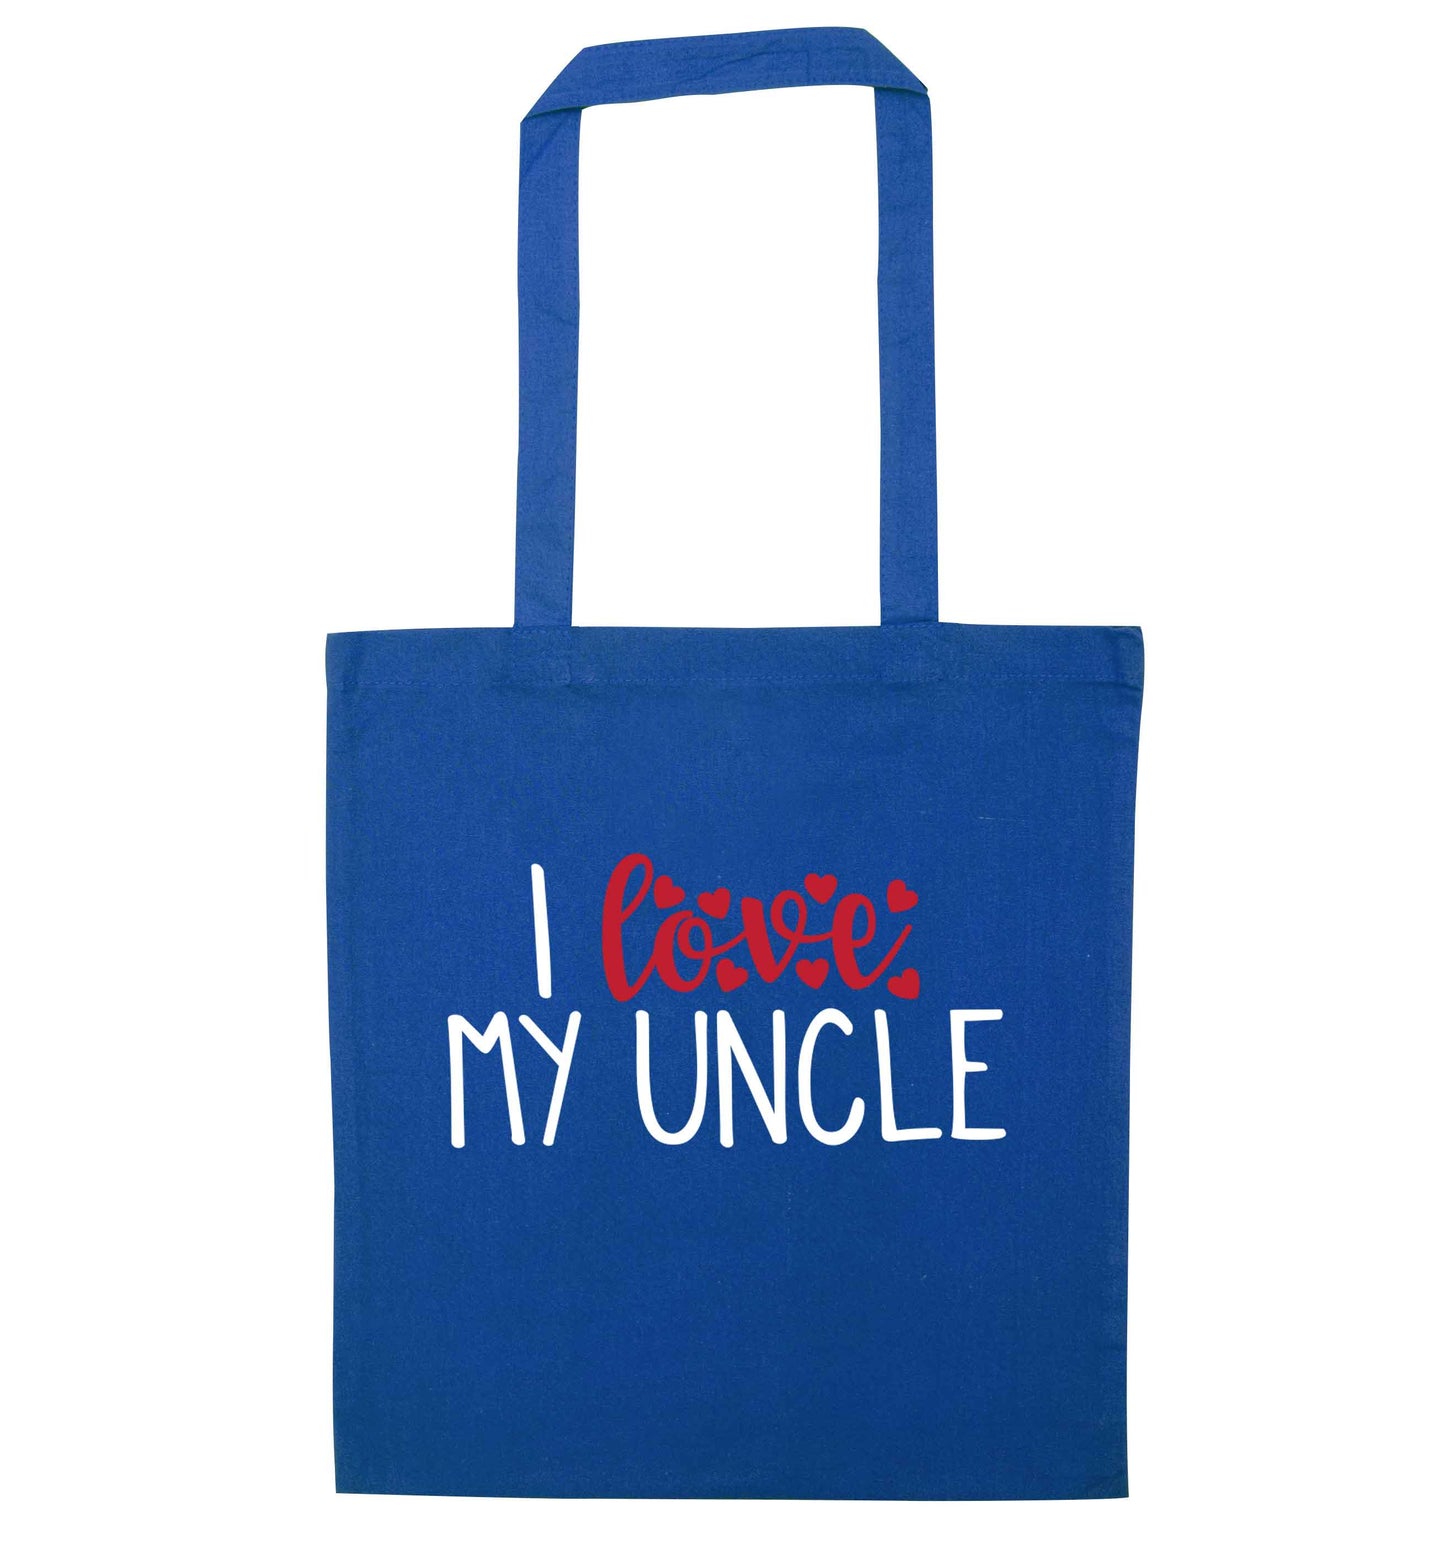 I love my uncle blue tote bag